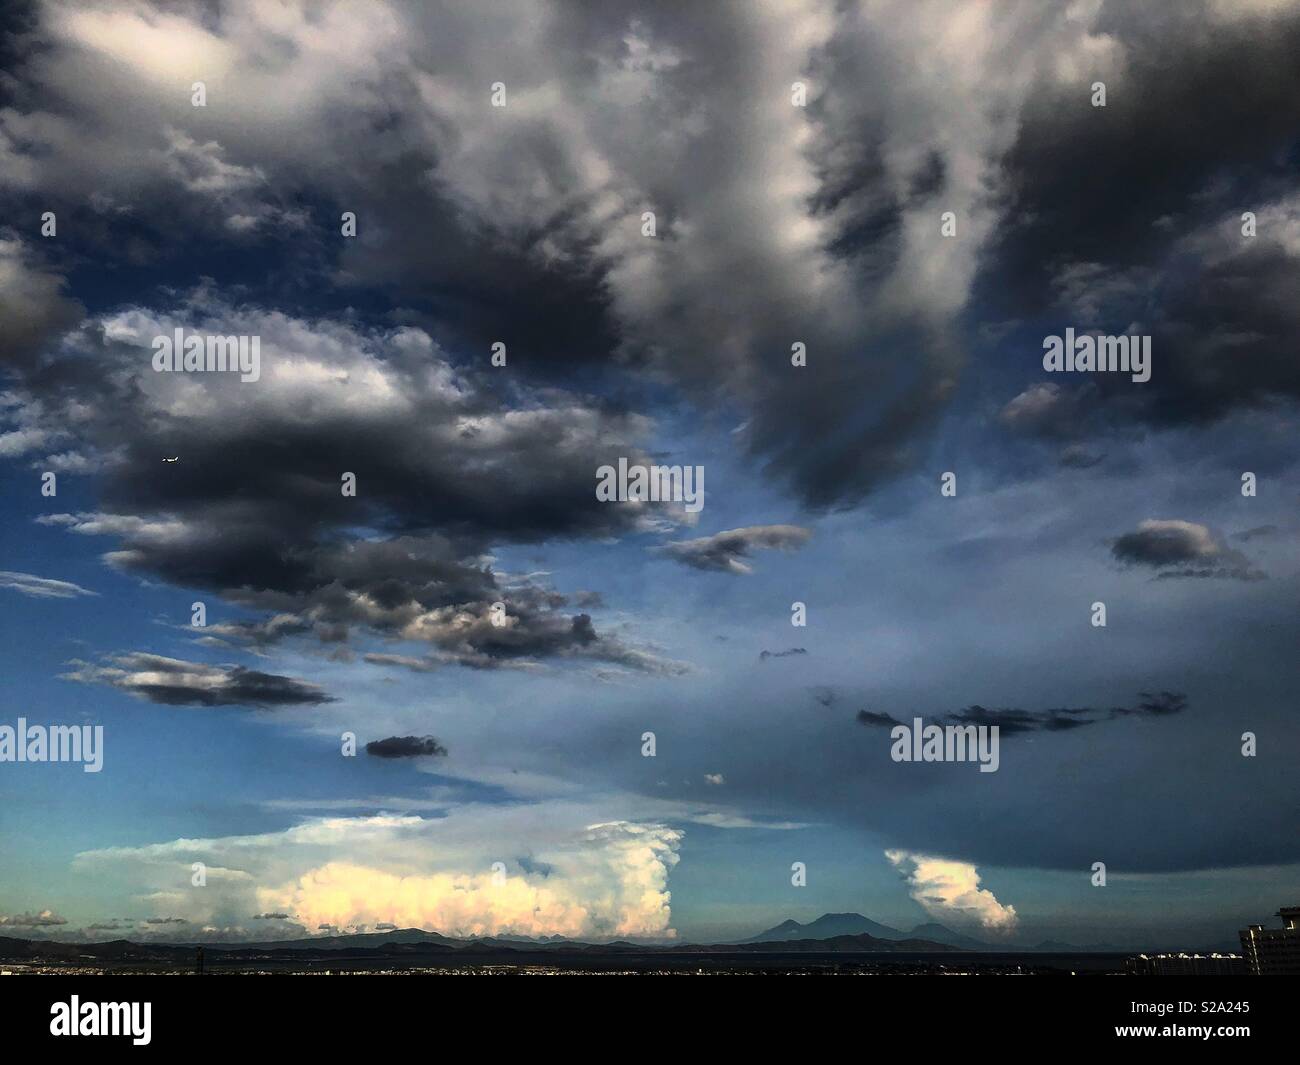 Anomalistic patterns of the clouds in abstract forms. NOT PHOTOSHOPPED. Taken from a balcony in a city within the Philippines, with Mountains in the horizon, around the afternoon. Stock Photo